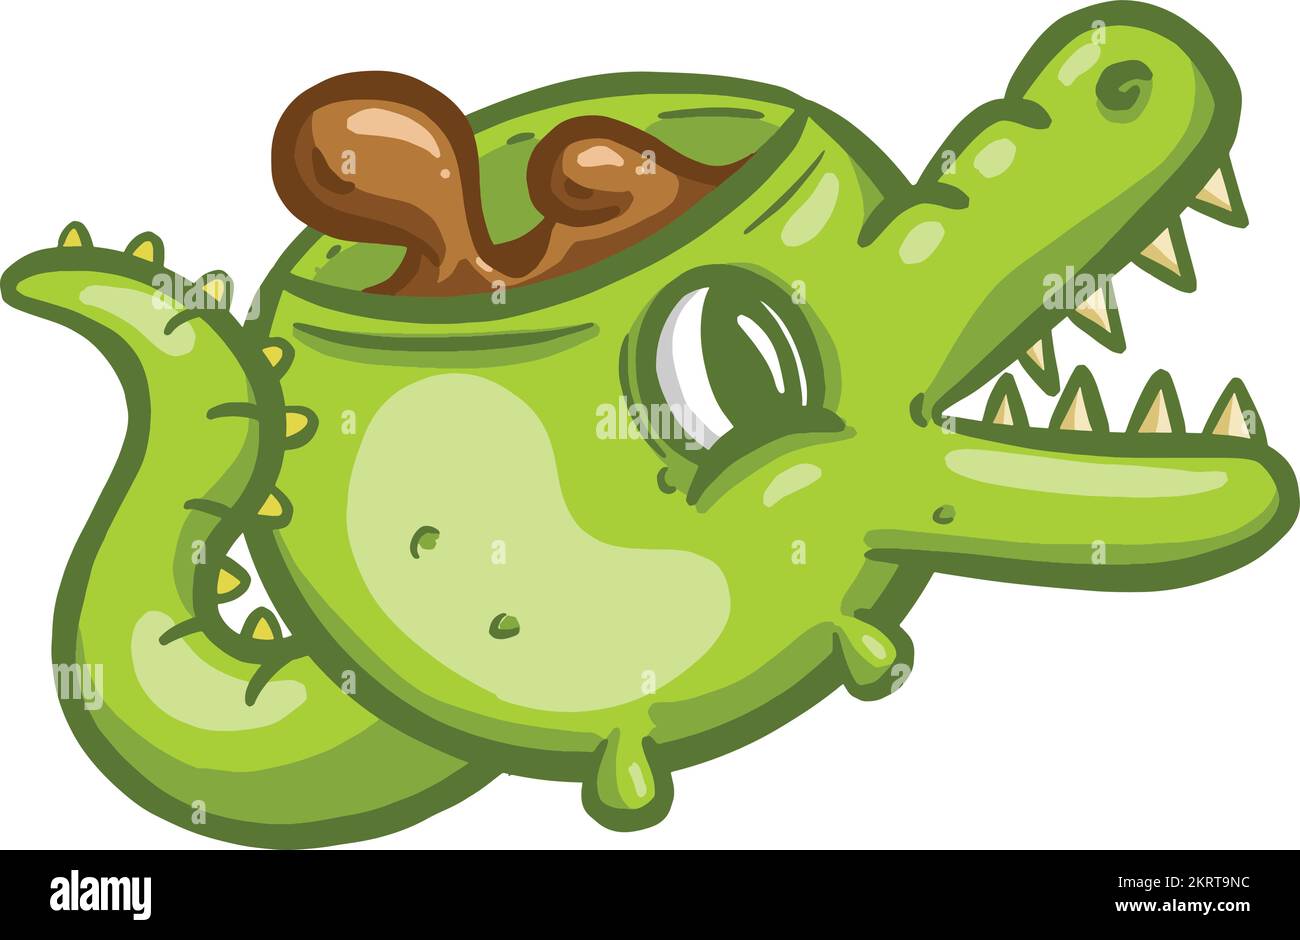 Cute Childs Coffee Cup Design Illustration in the Shape of a Crocodile Stock Vector